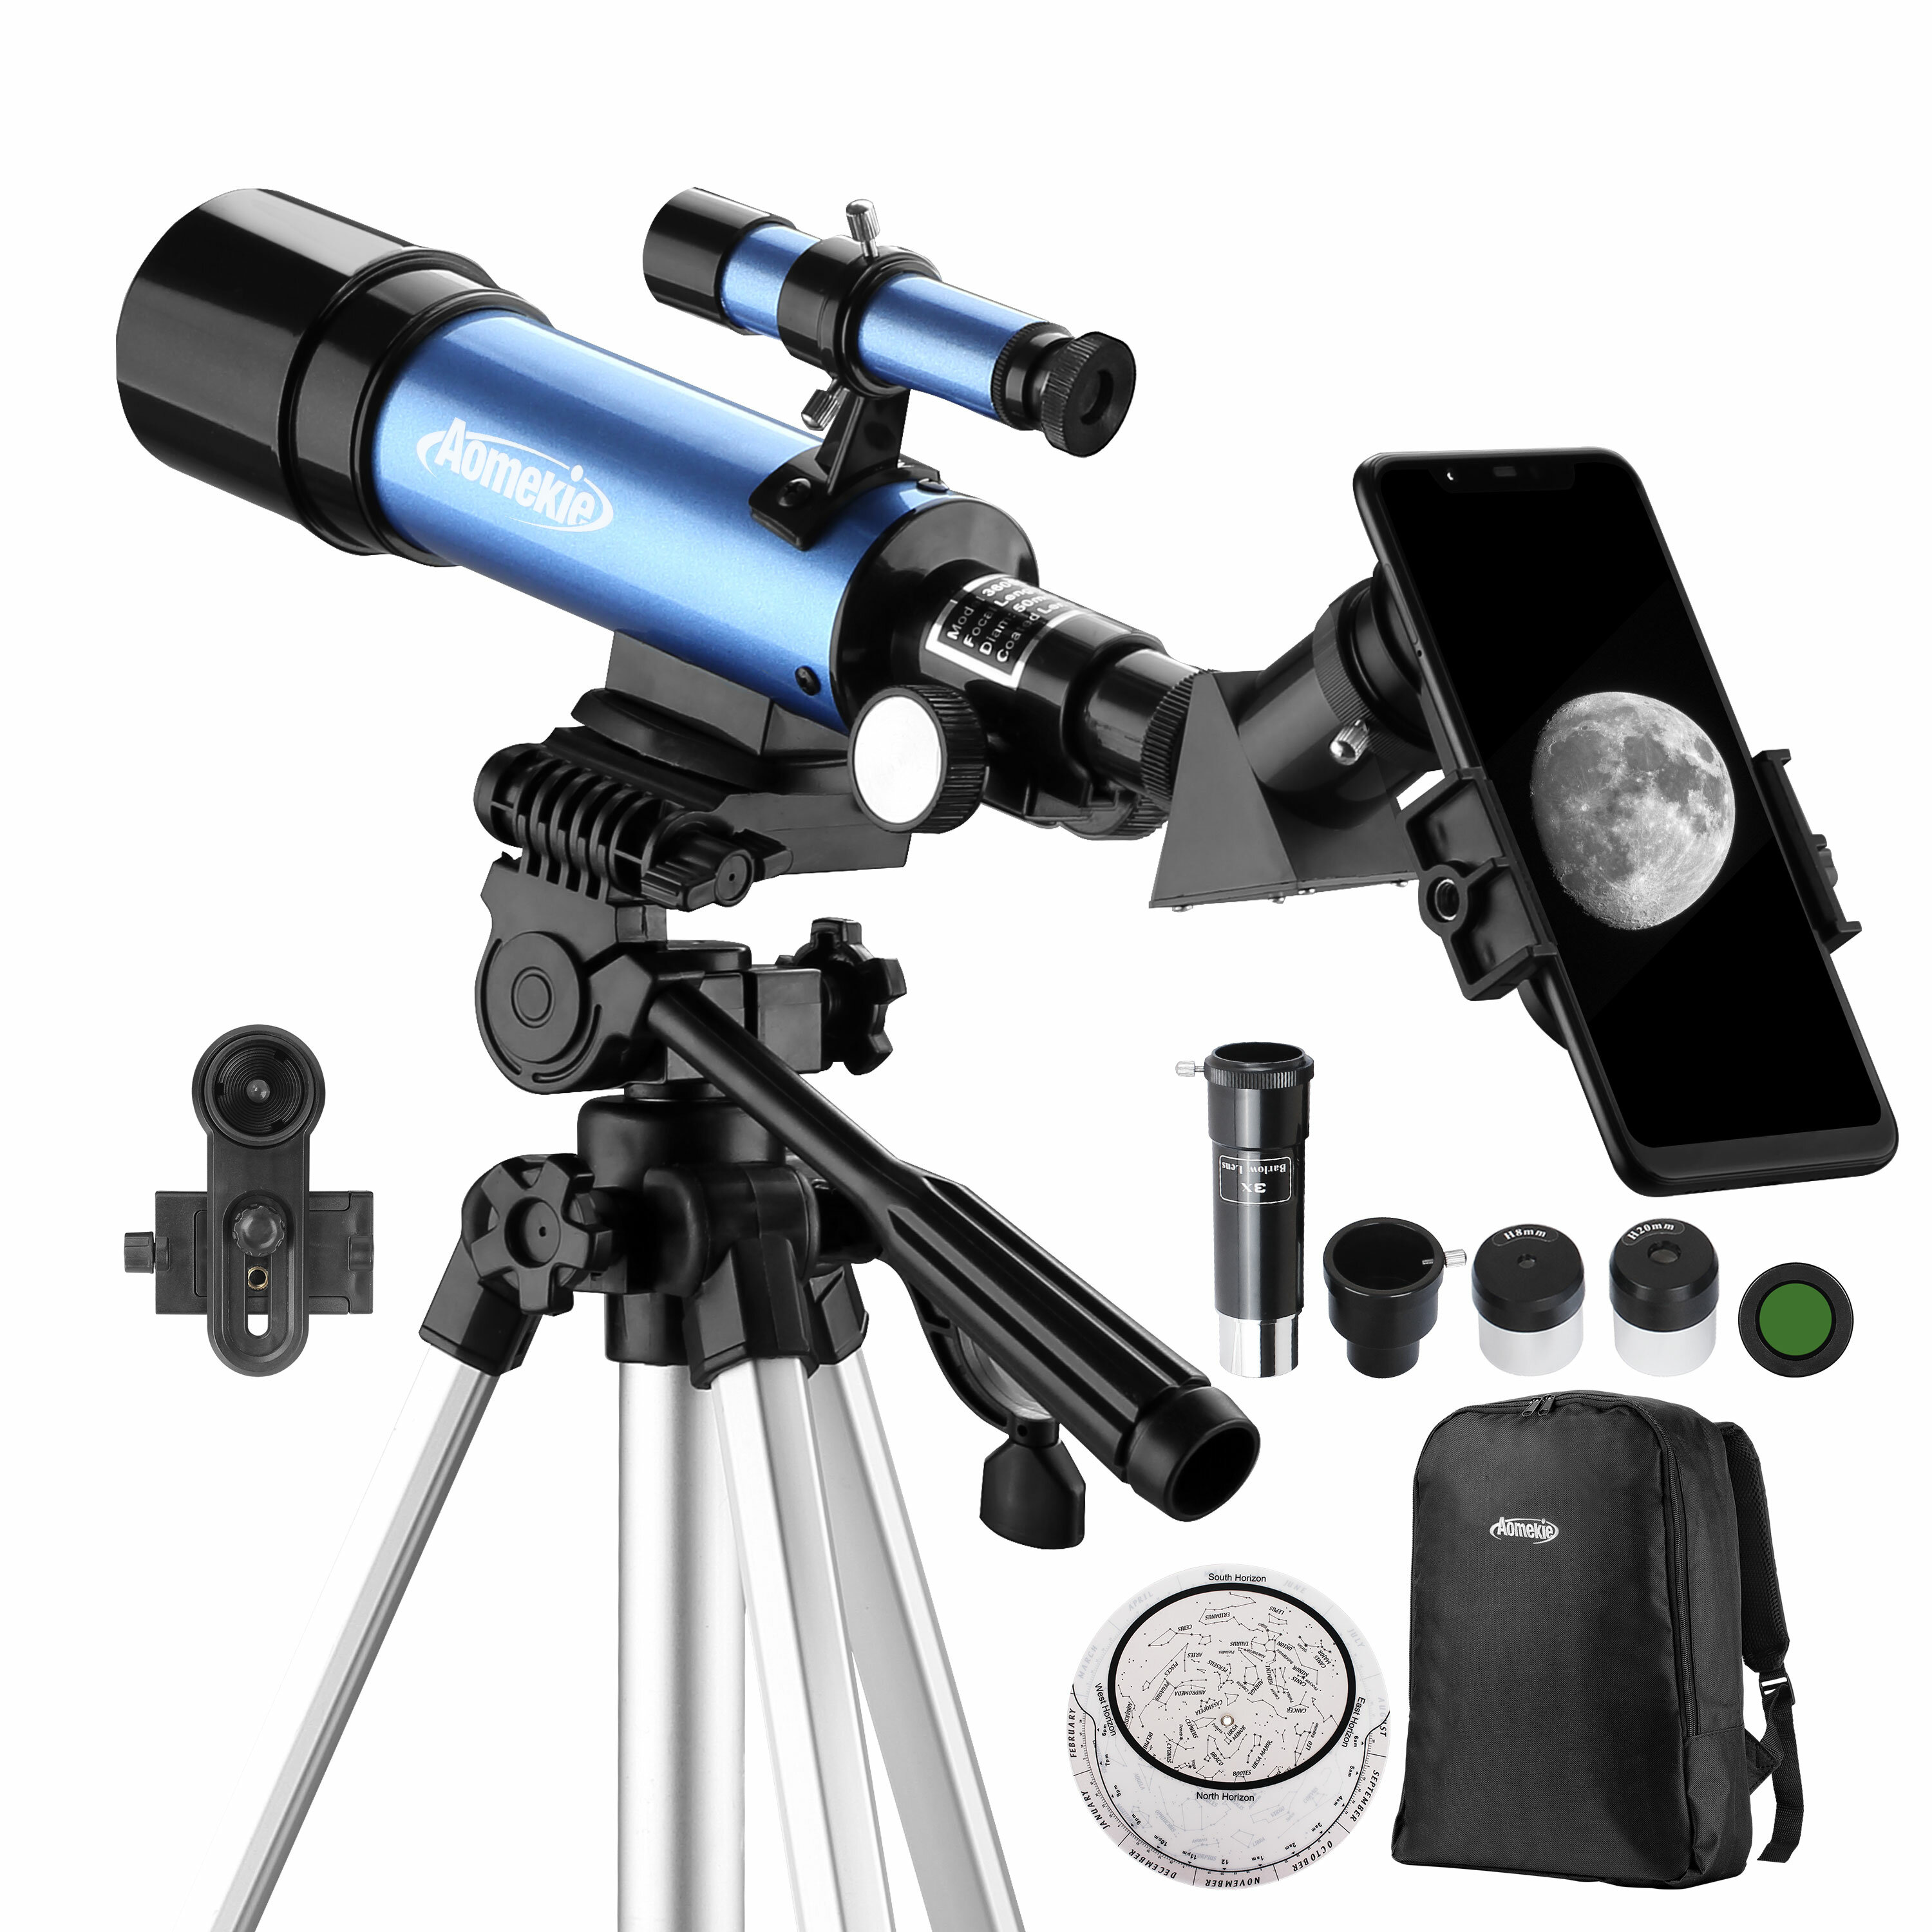 [EU Direct] AOMEKIE 18X-135X Astronomical Telescope 50mm Aperture Refractor Telescopes with Phone Adapter & Adjustable Tripod for Astronomy Beginners AO2013